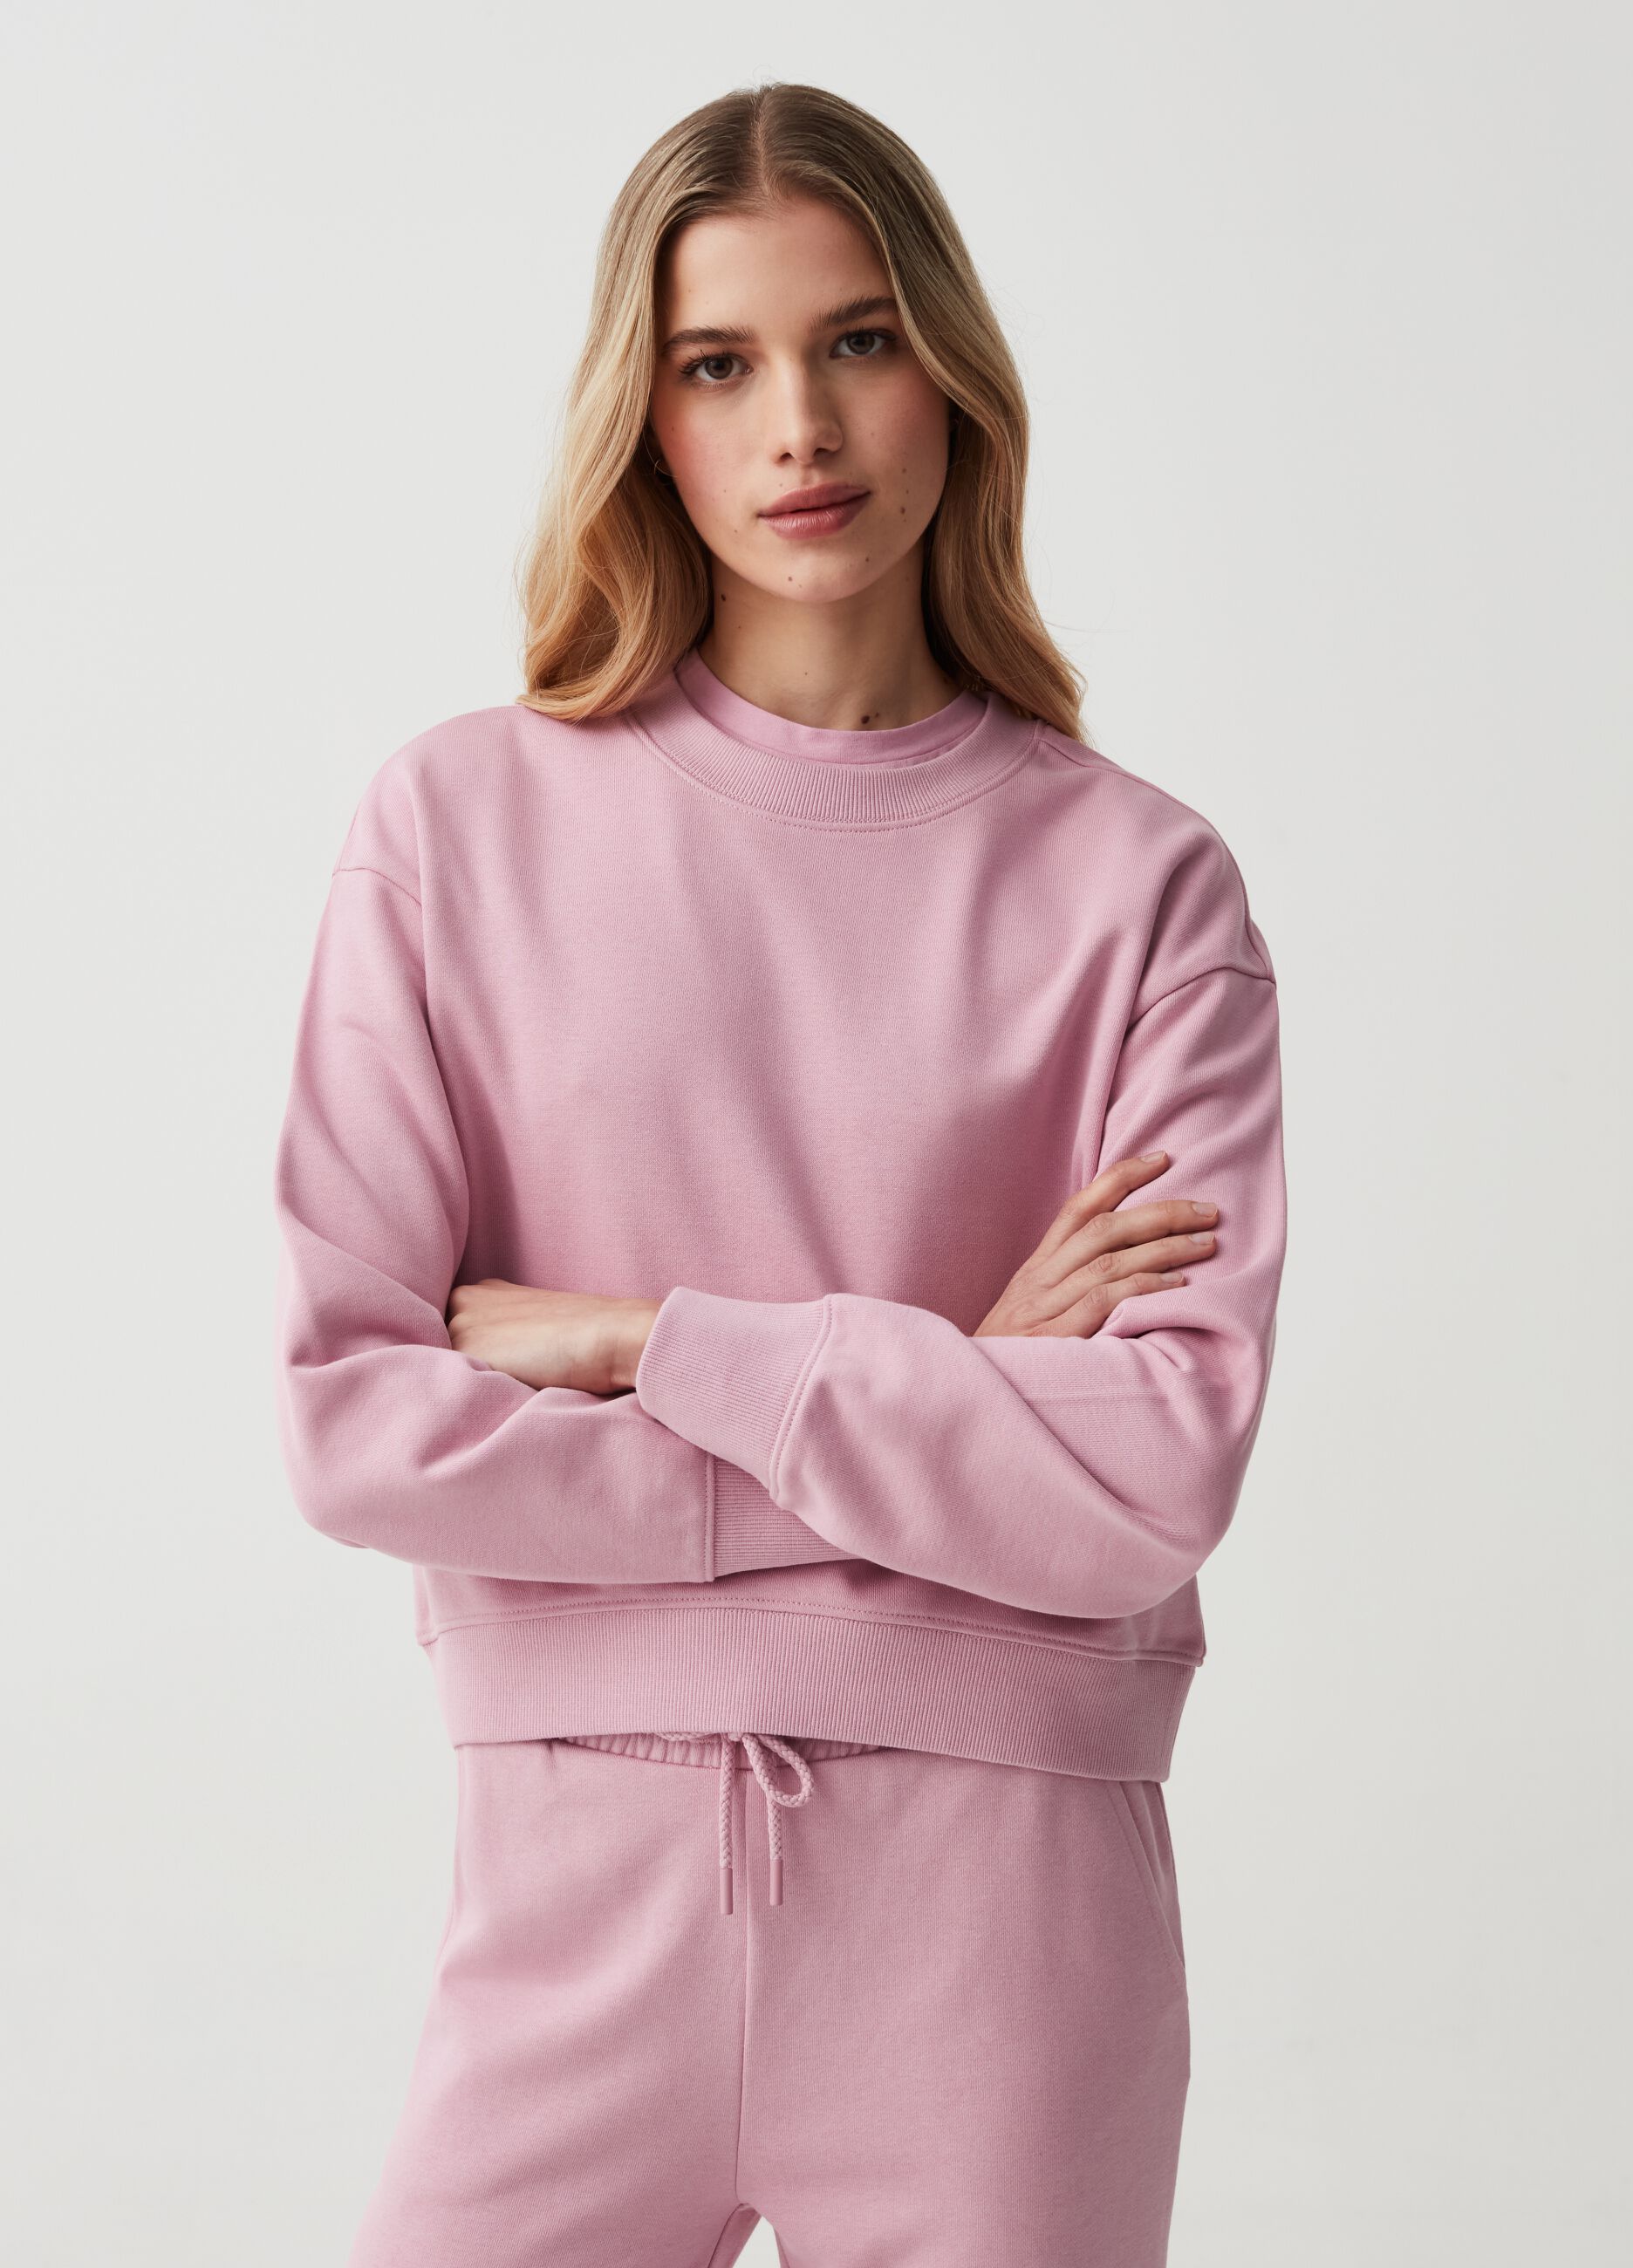 Essential sweatshirt with dropped shoulder